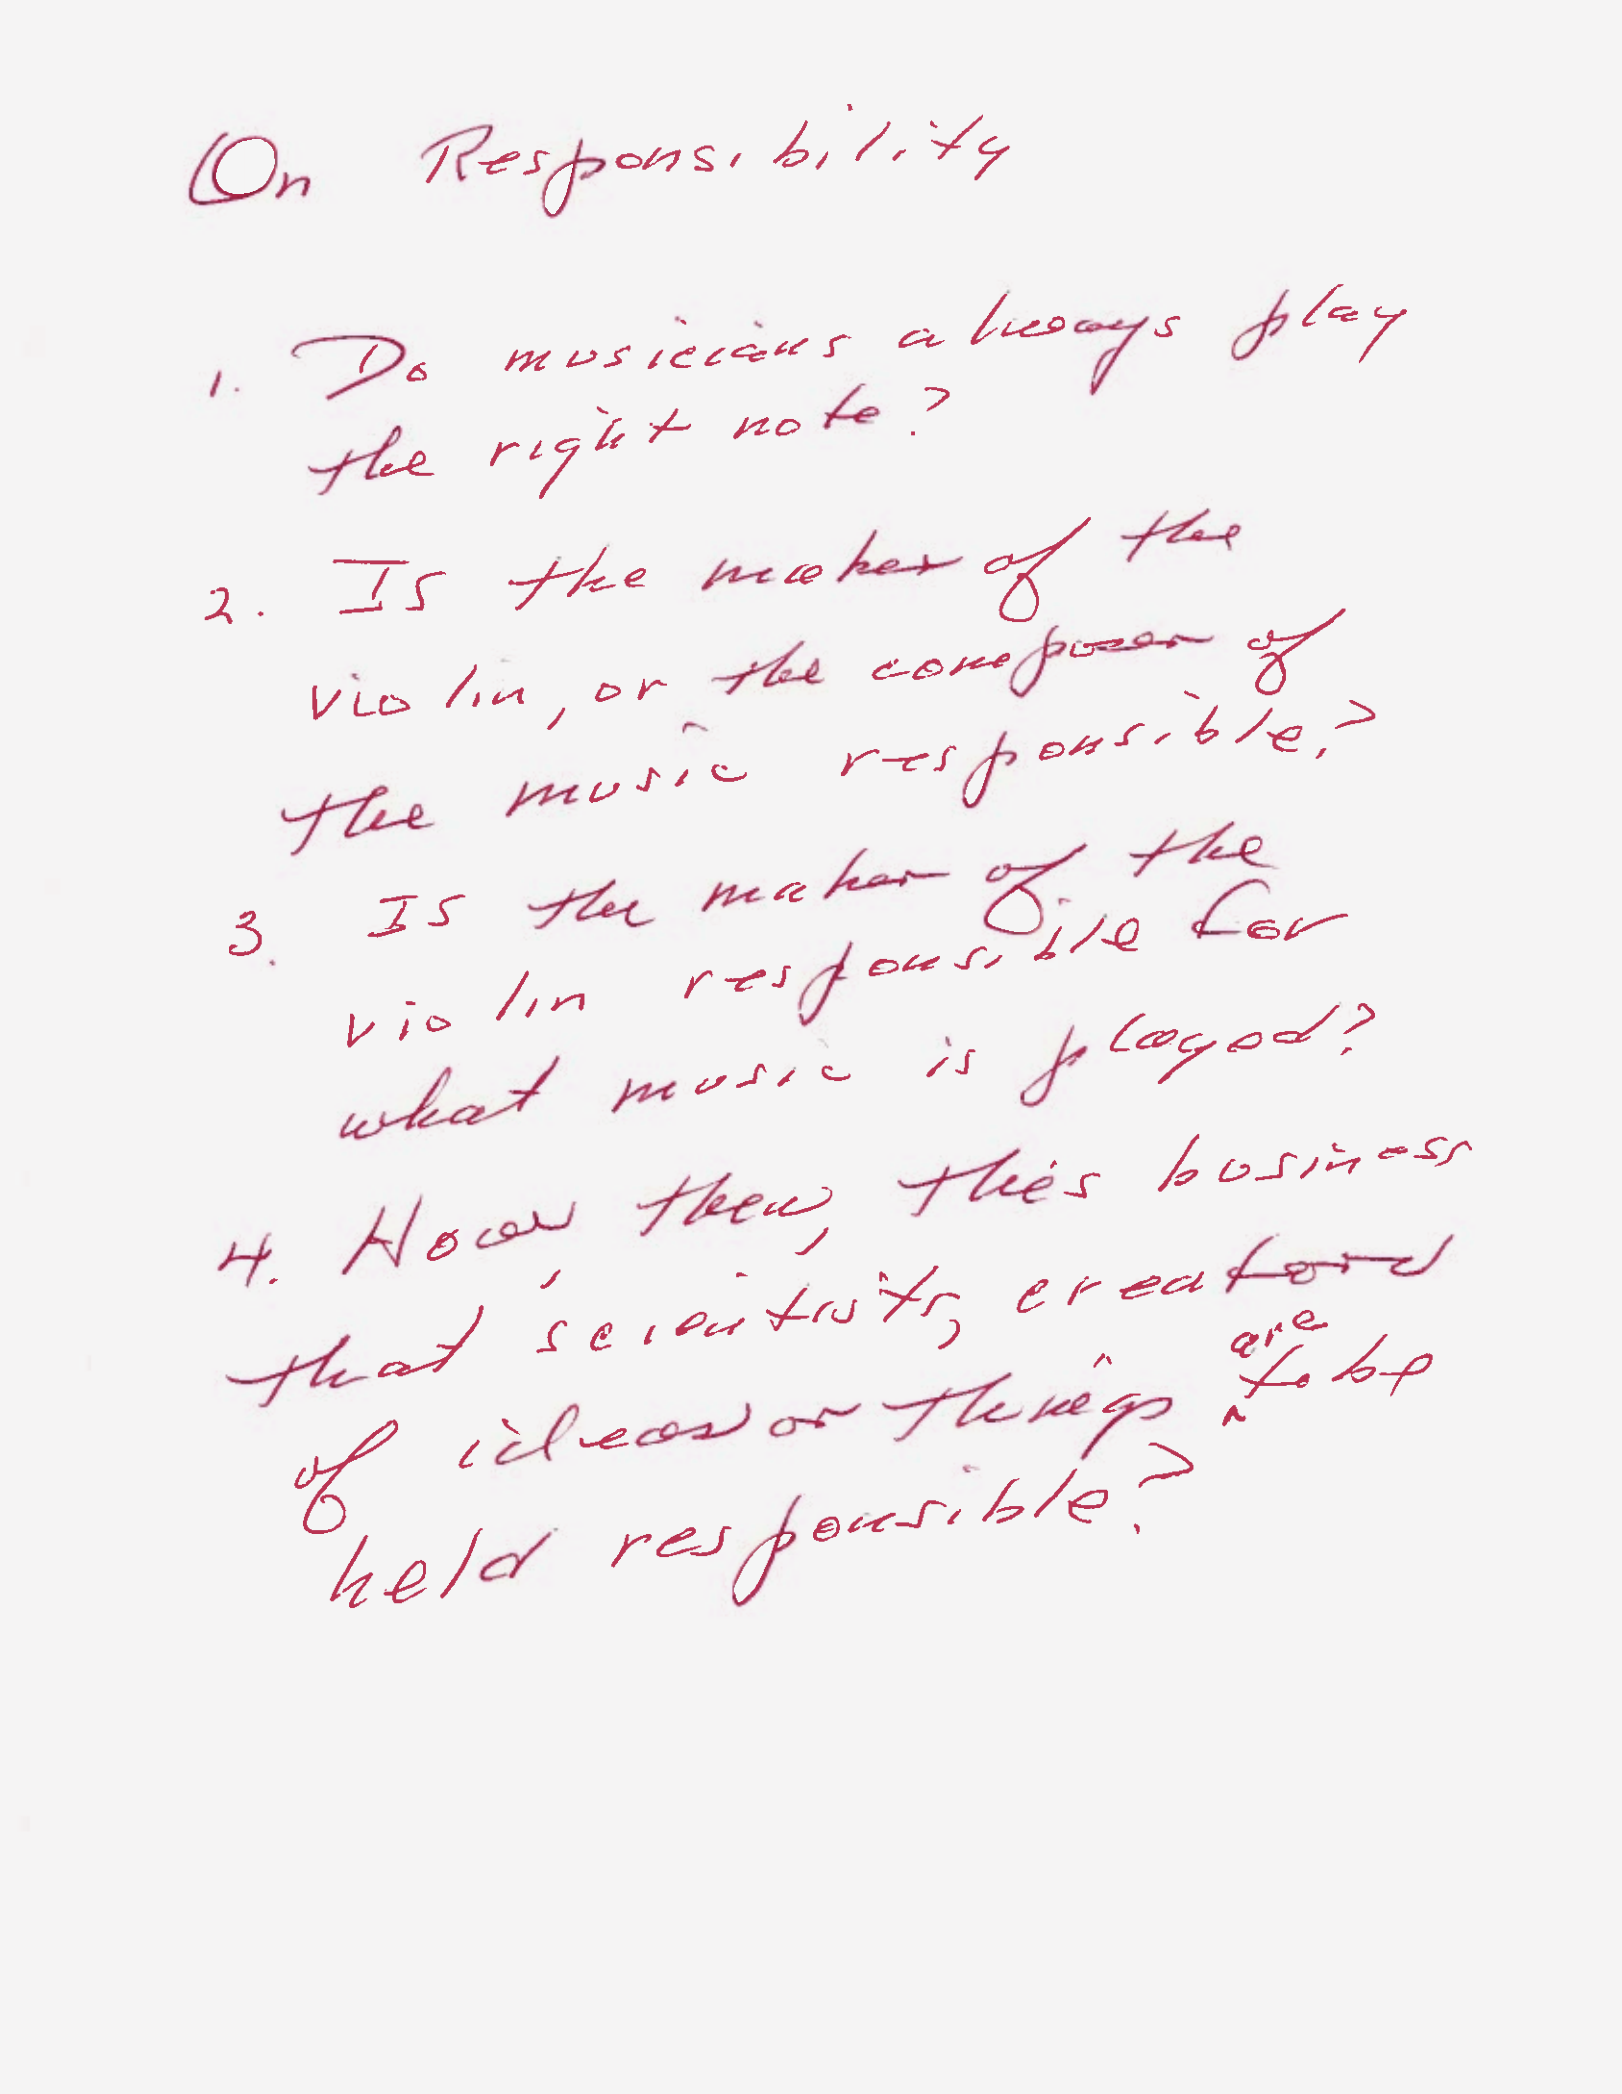 Hamming’s handwritten notes, titled “On Responsibility,” from the NPS. Image from the Naval Postgraduate School.